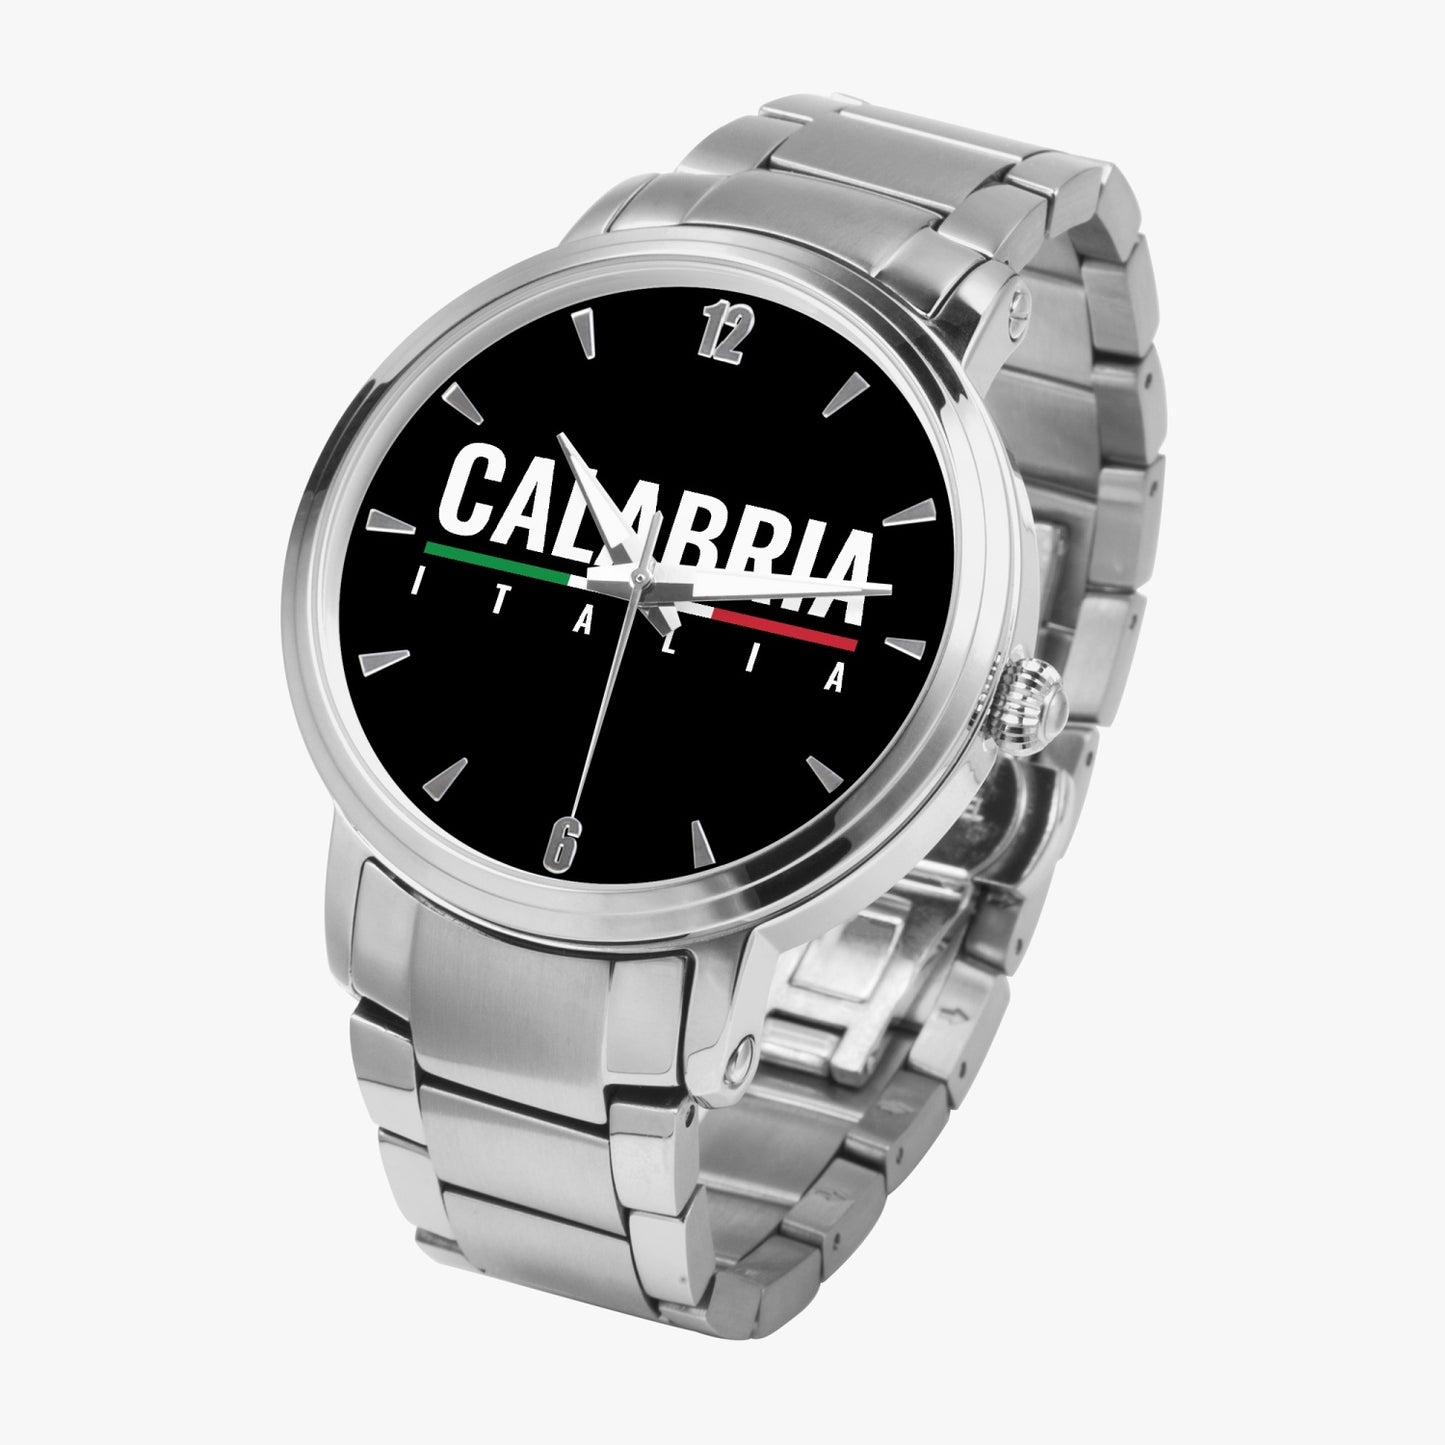 Calabria Italia Automatic Movement Watch - Premium Stainless Steel